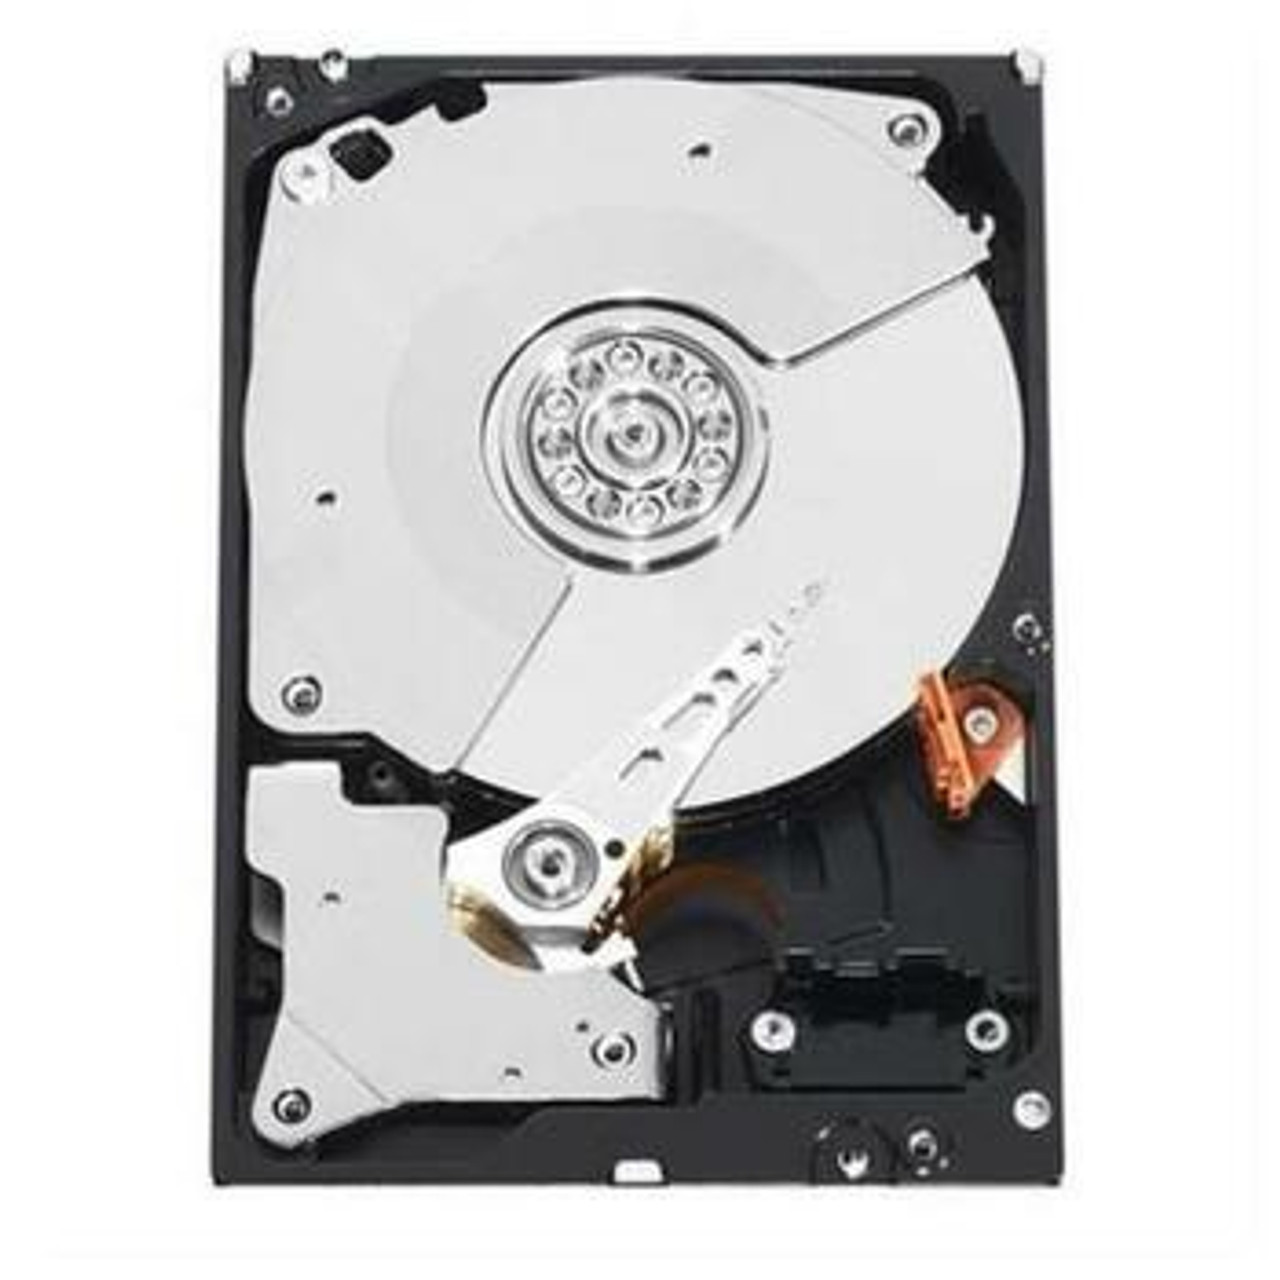 05NYCT Dell 146GB 15000RPM SAS 6.0 Gbps 2.5 64MB Cache Hot Swap Hard Drive